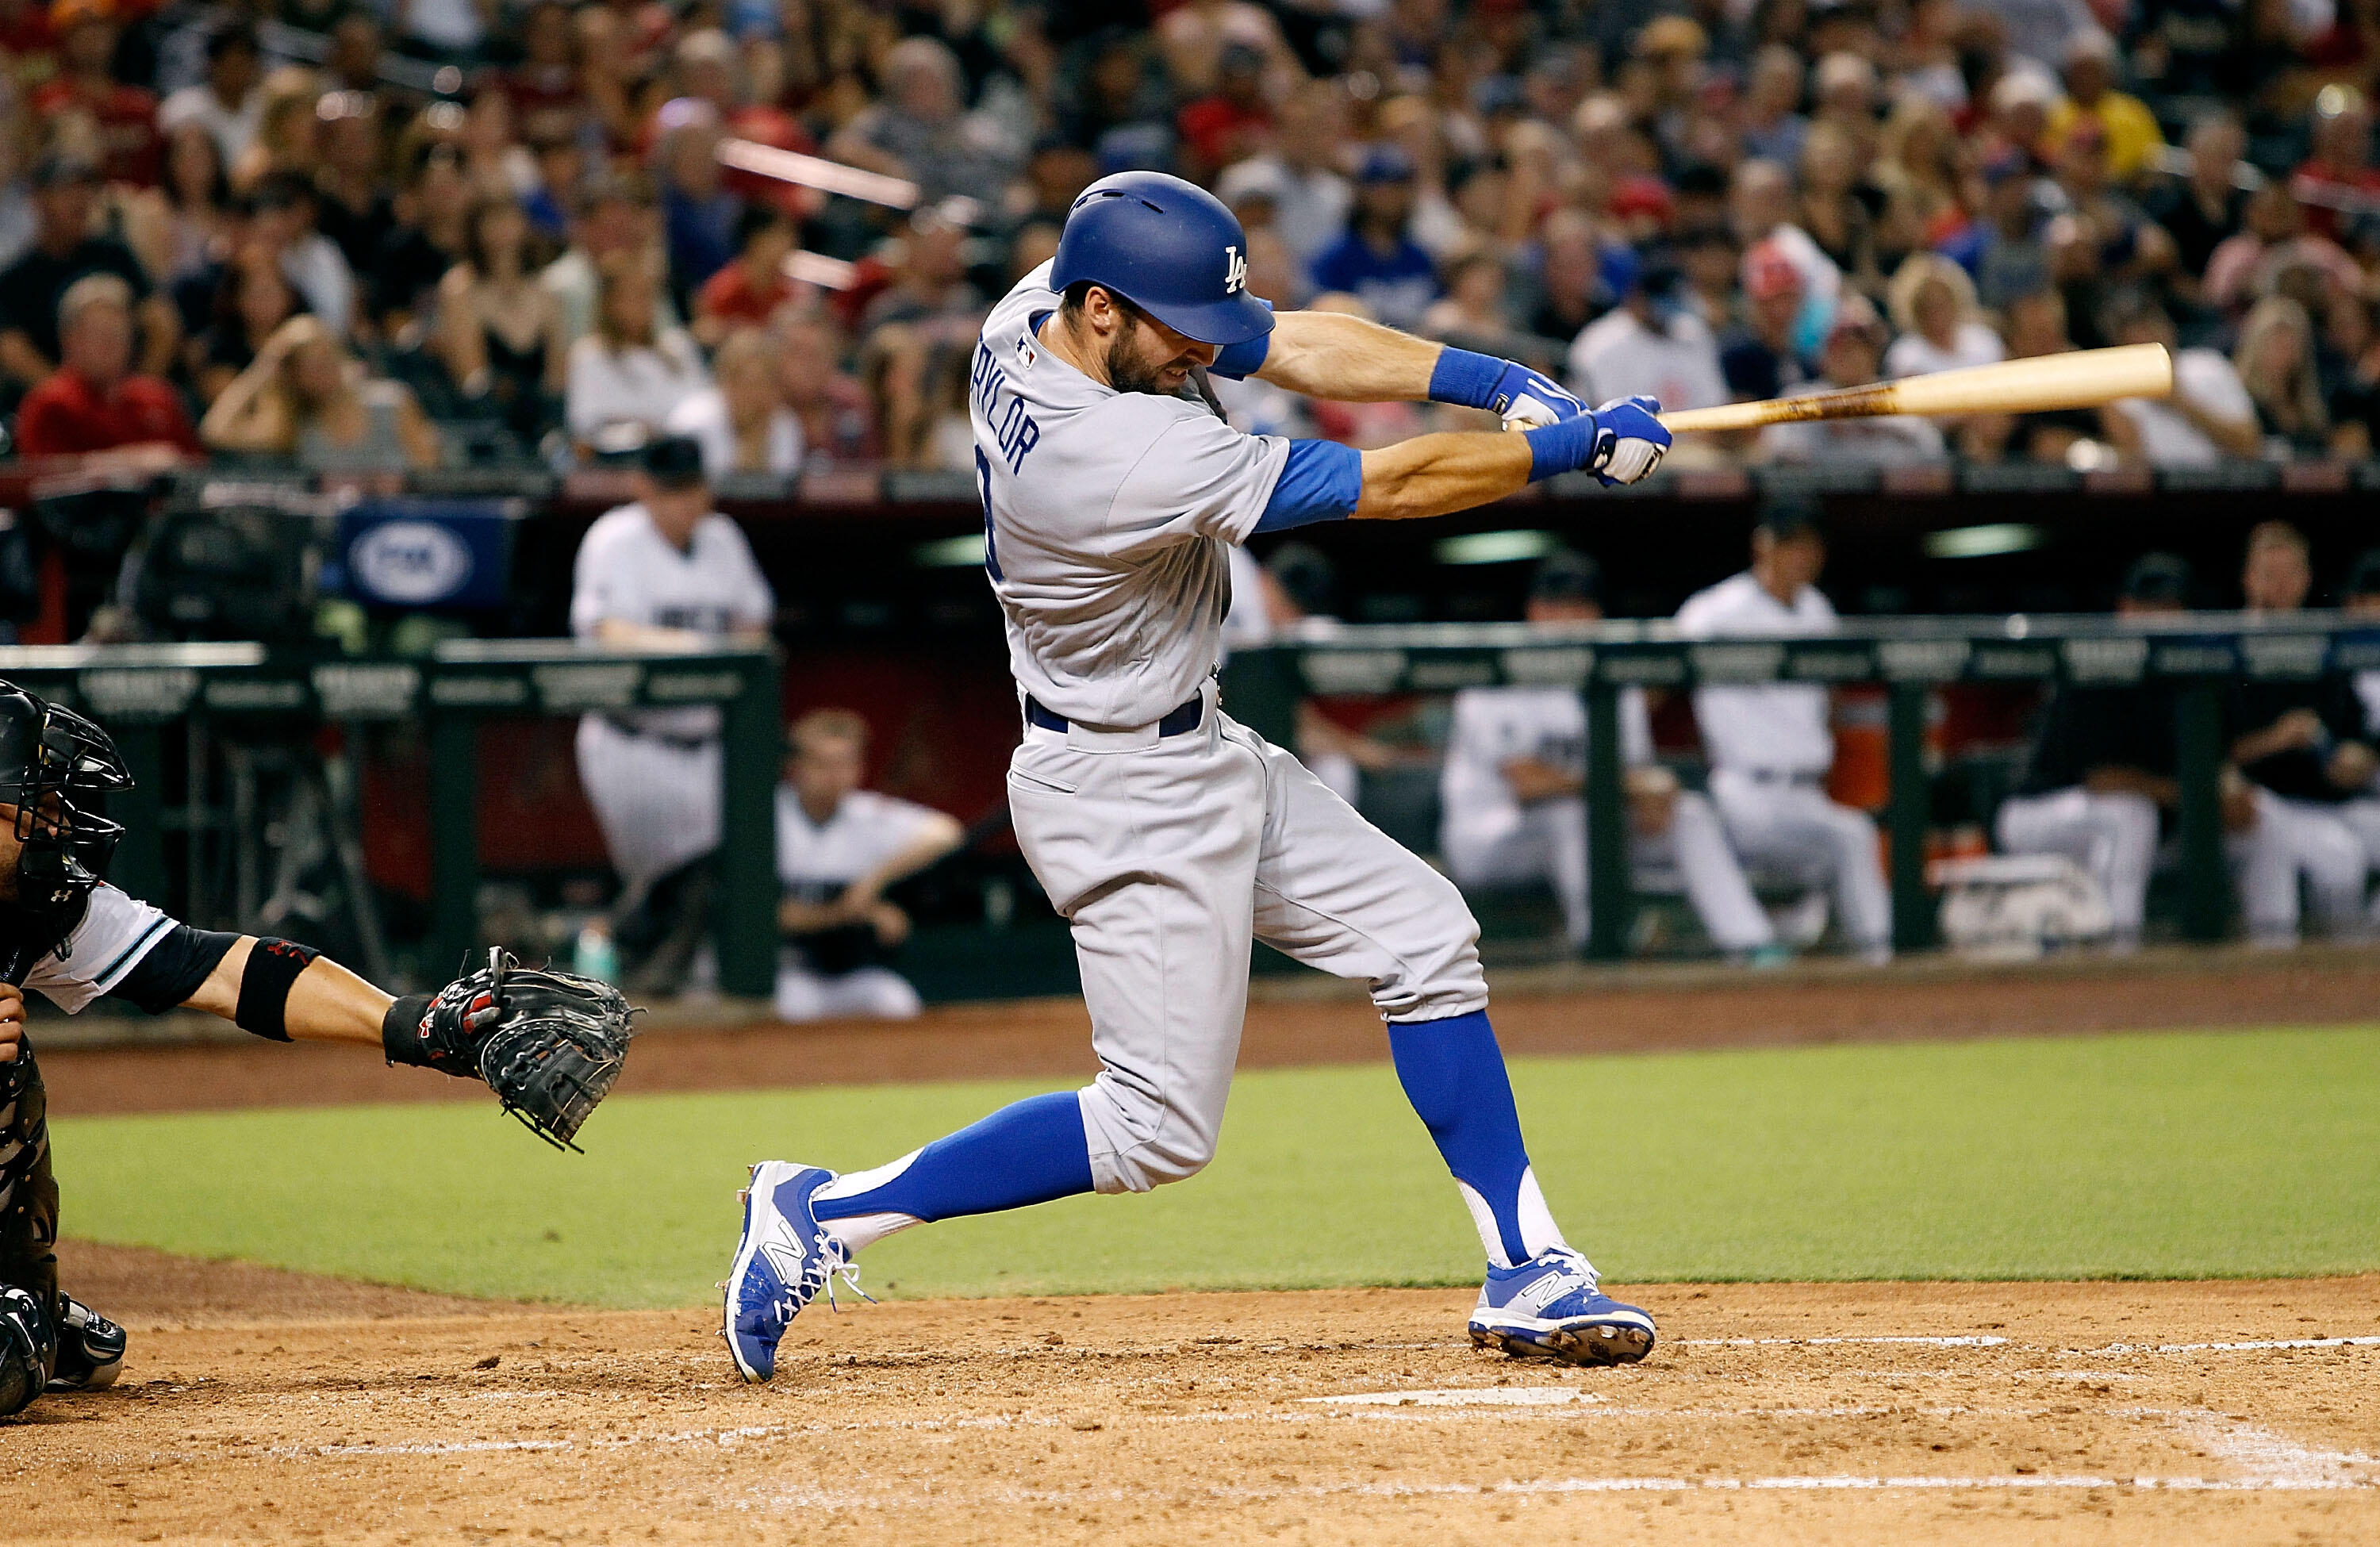 PHOENIX, AZ - JULY 15:  Chris Taylor #3 of the Los Angeles Dodgers hits a two RBI triple against the Arizona Diamondbacks during the fourth inning of a MLB game at Chase Field on July 15, 2016 in Phoenix, Arizona.  (Photo by Ralph Freso/Getty Images)